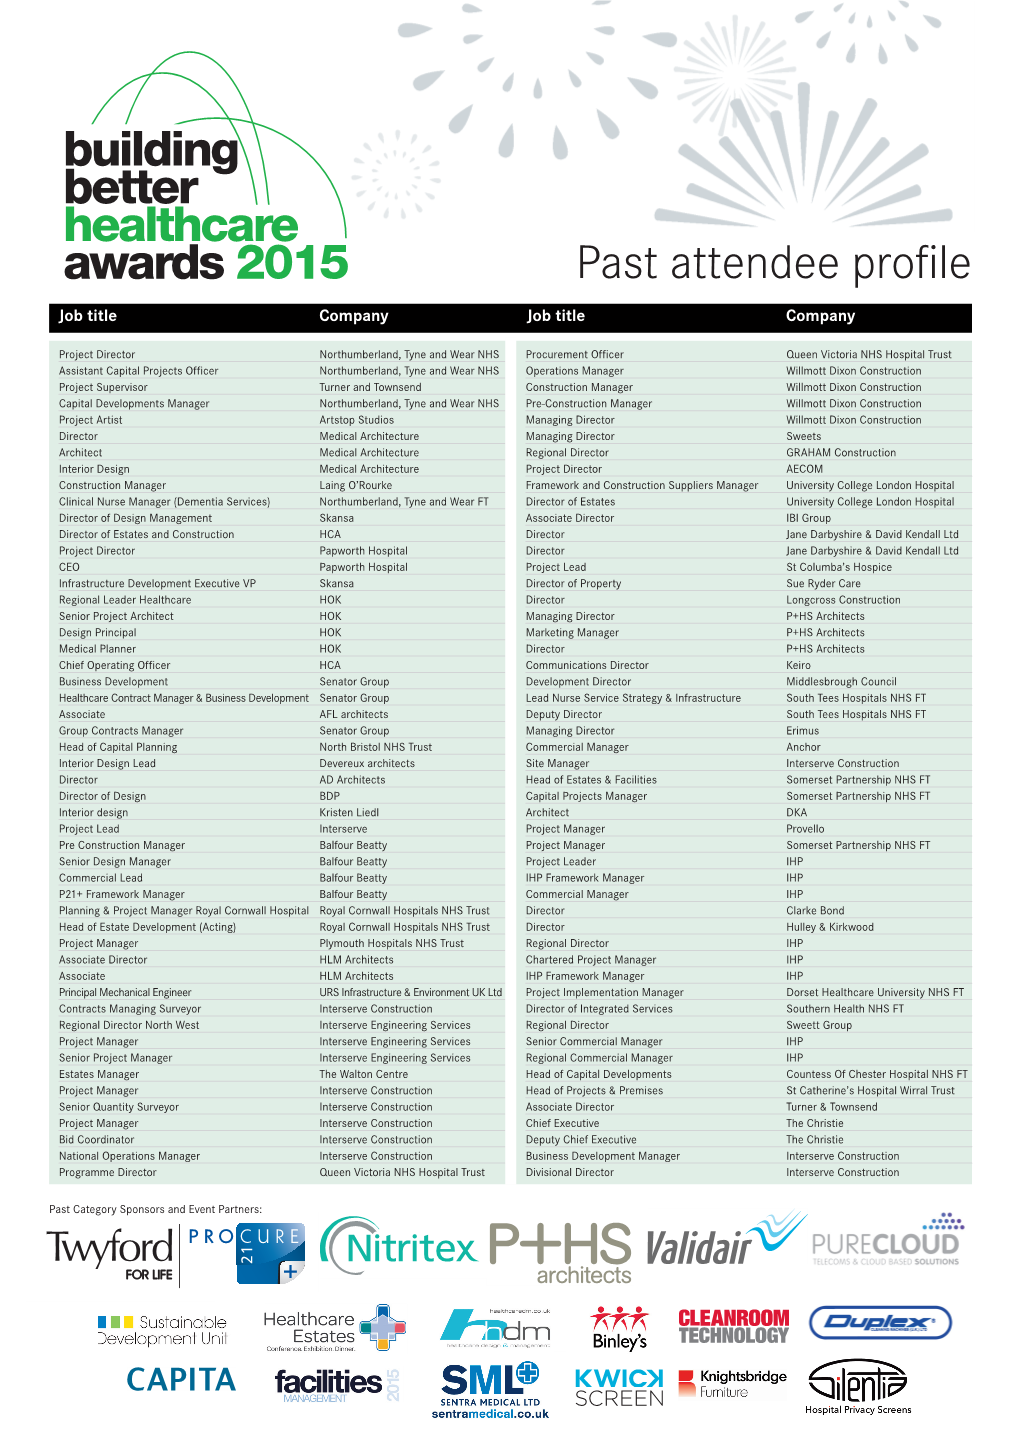 Building Better Healthcare Awards 2015 Past Attendee Profile